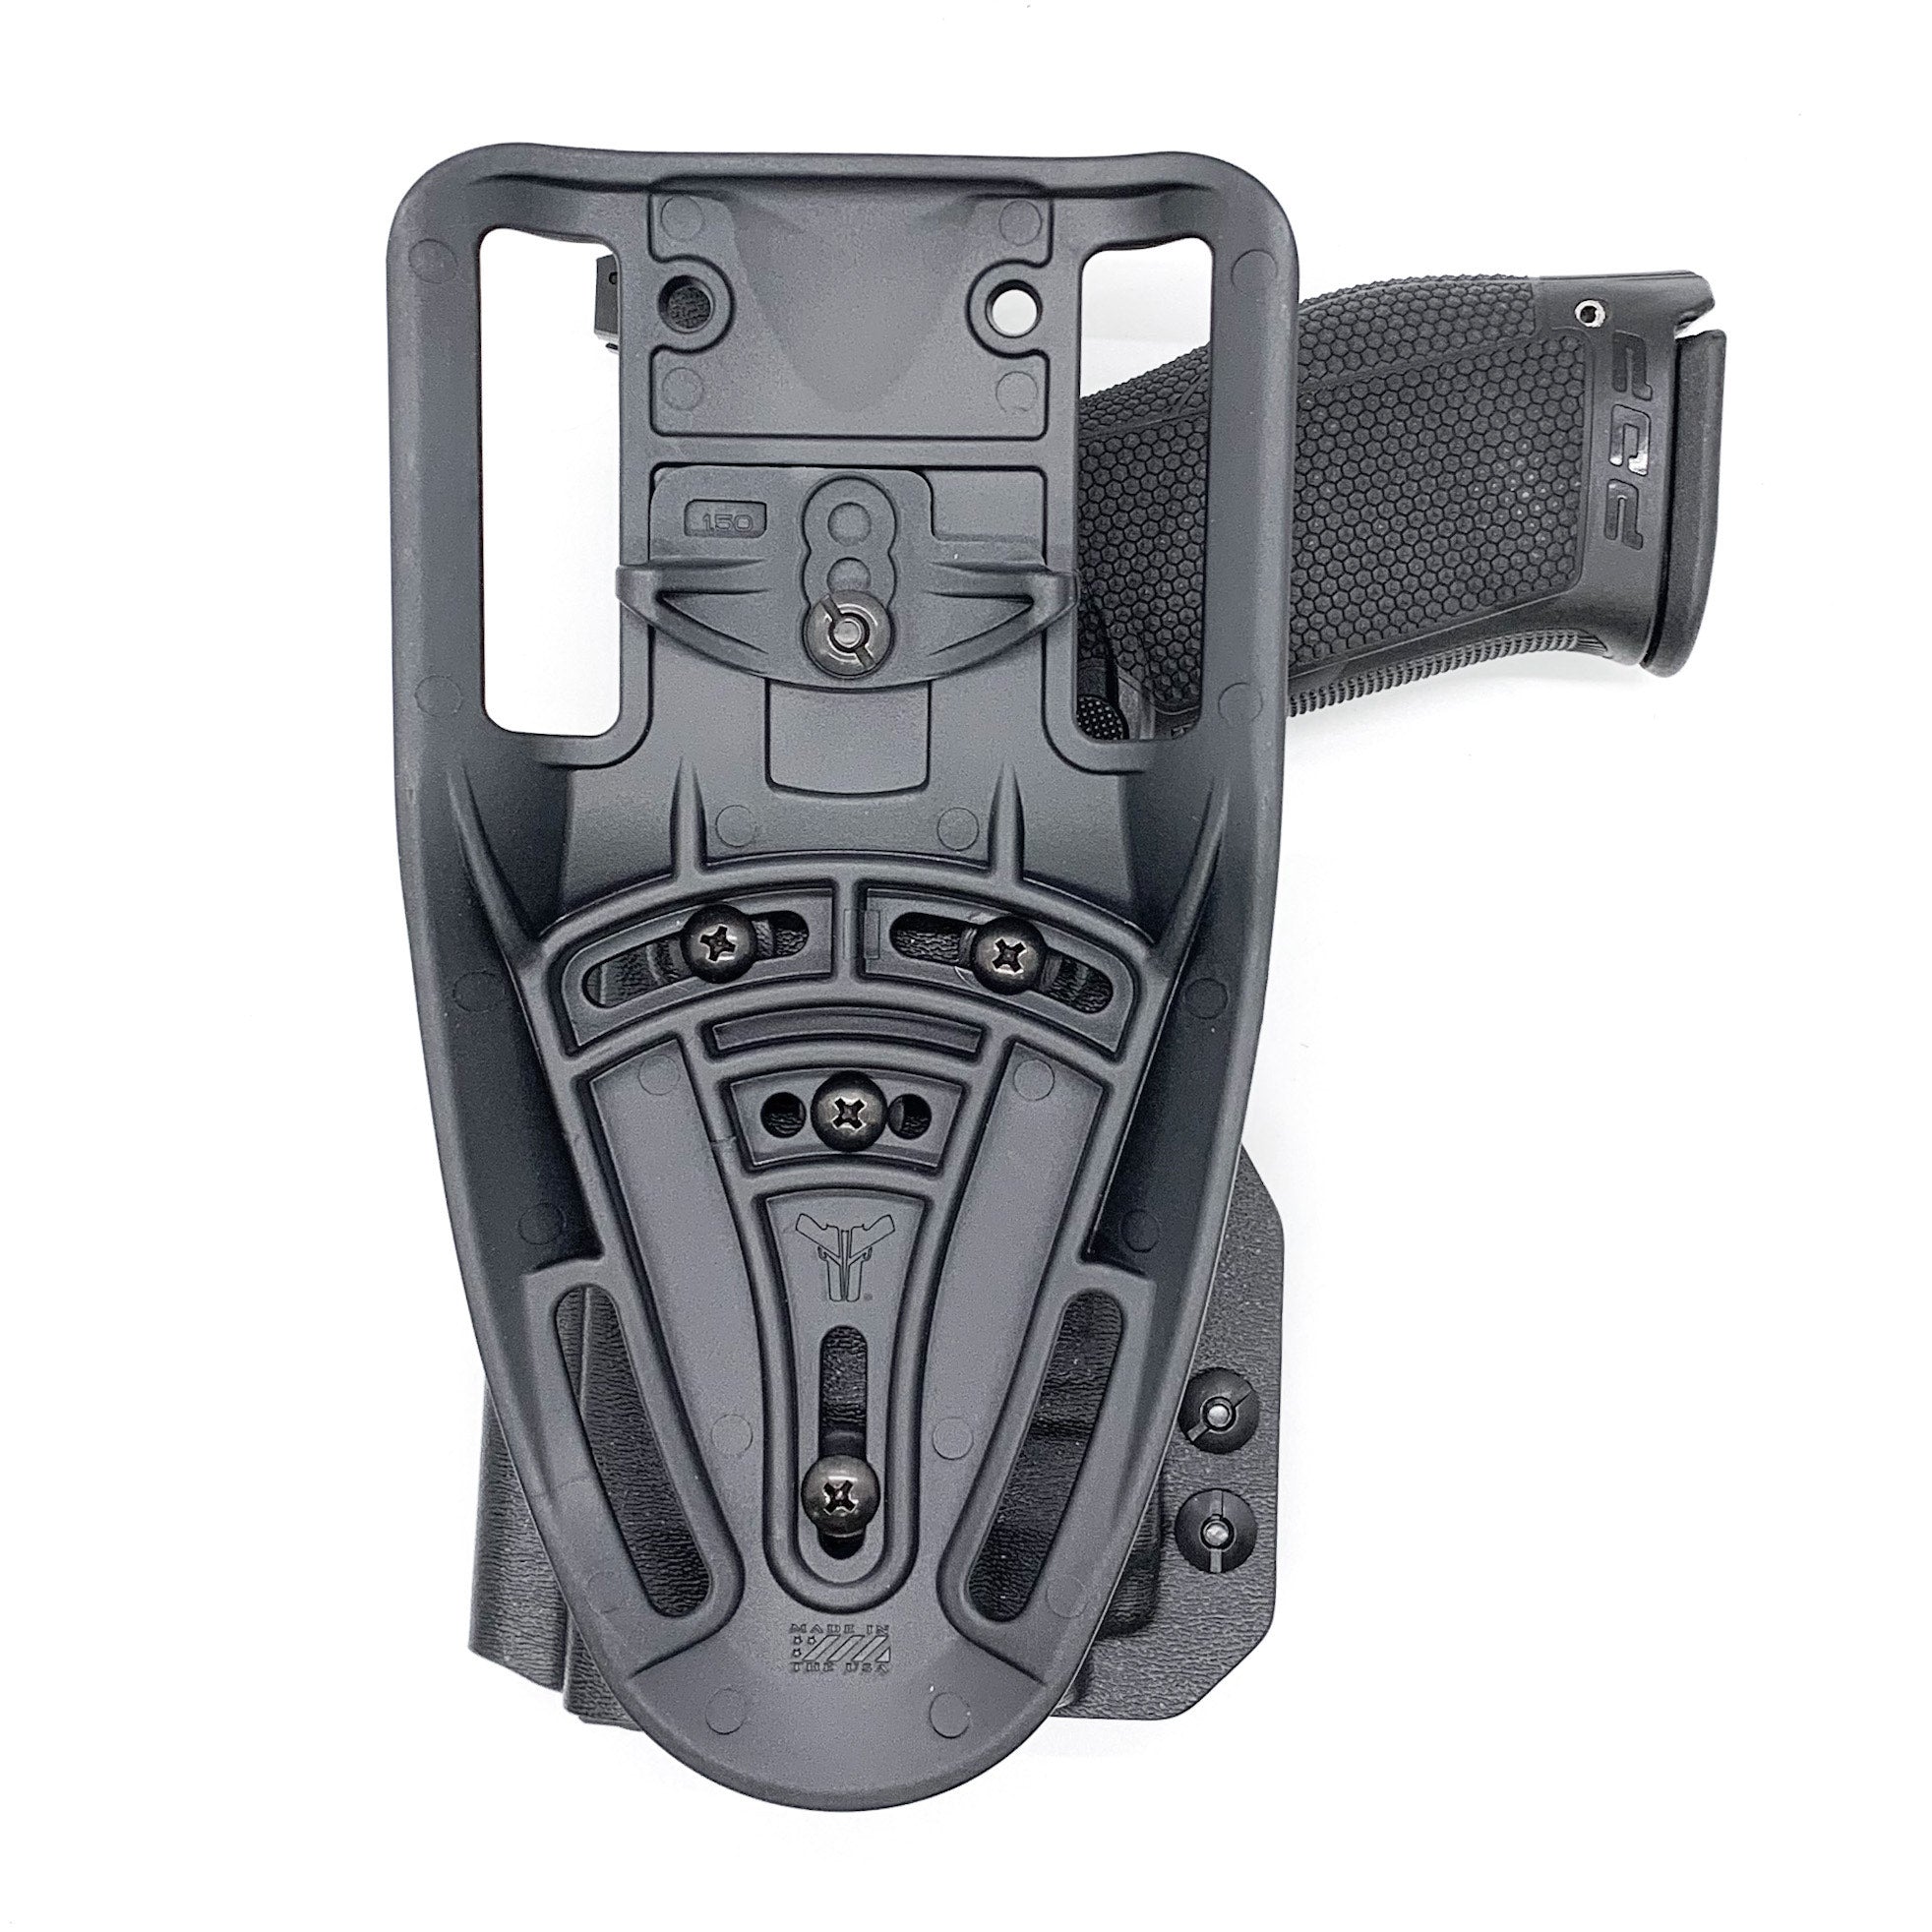 For the best outside waistband OWB Kydex duty or competition style holster designed to fit the Walther PDP 4" Compact pistol with the Streamlight TLR-8 mounted on the firearm, shop Four Brothers Holsters. Cut for red dot sights, adjustable retention, and open muzzle for threaded barrel or compensator